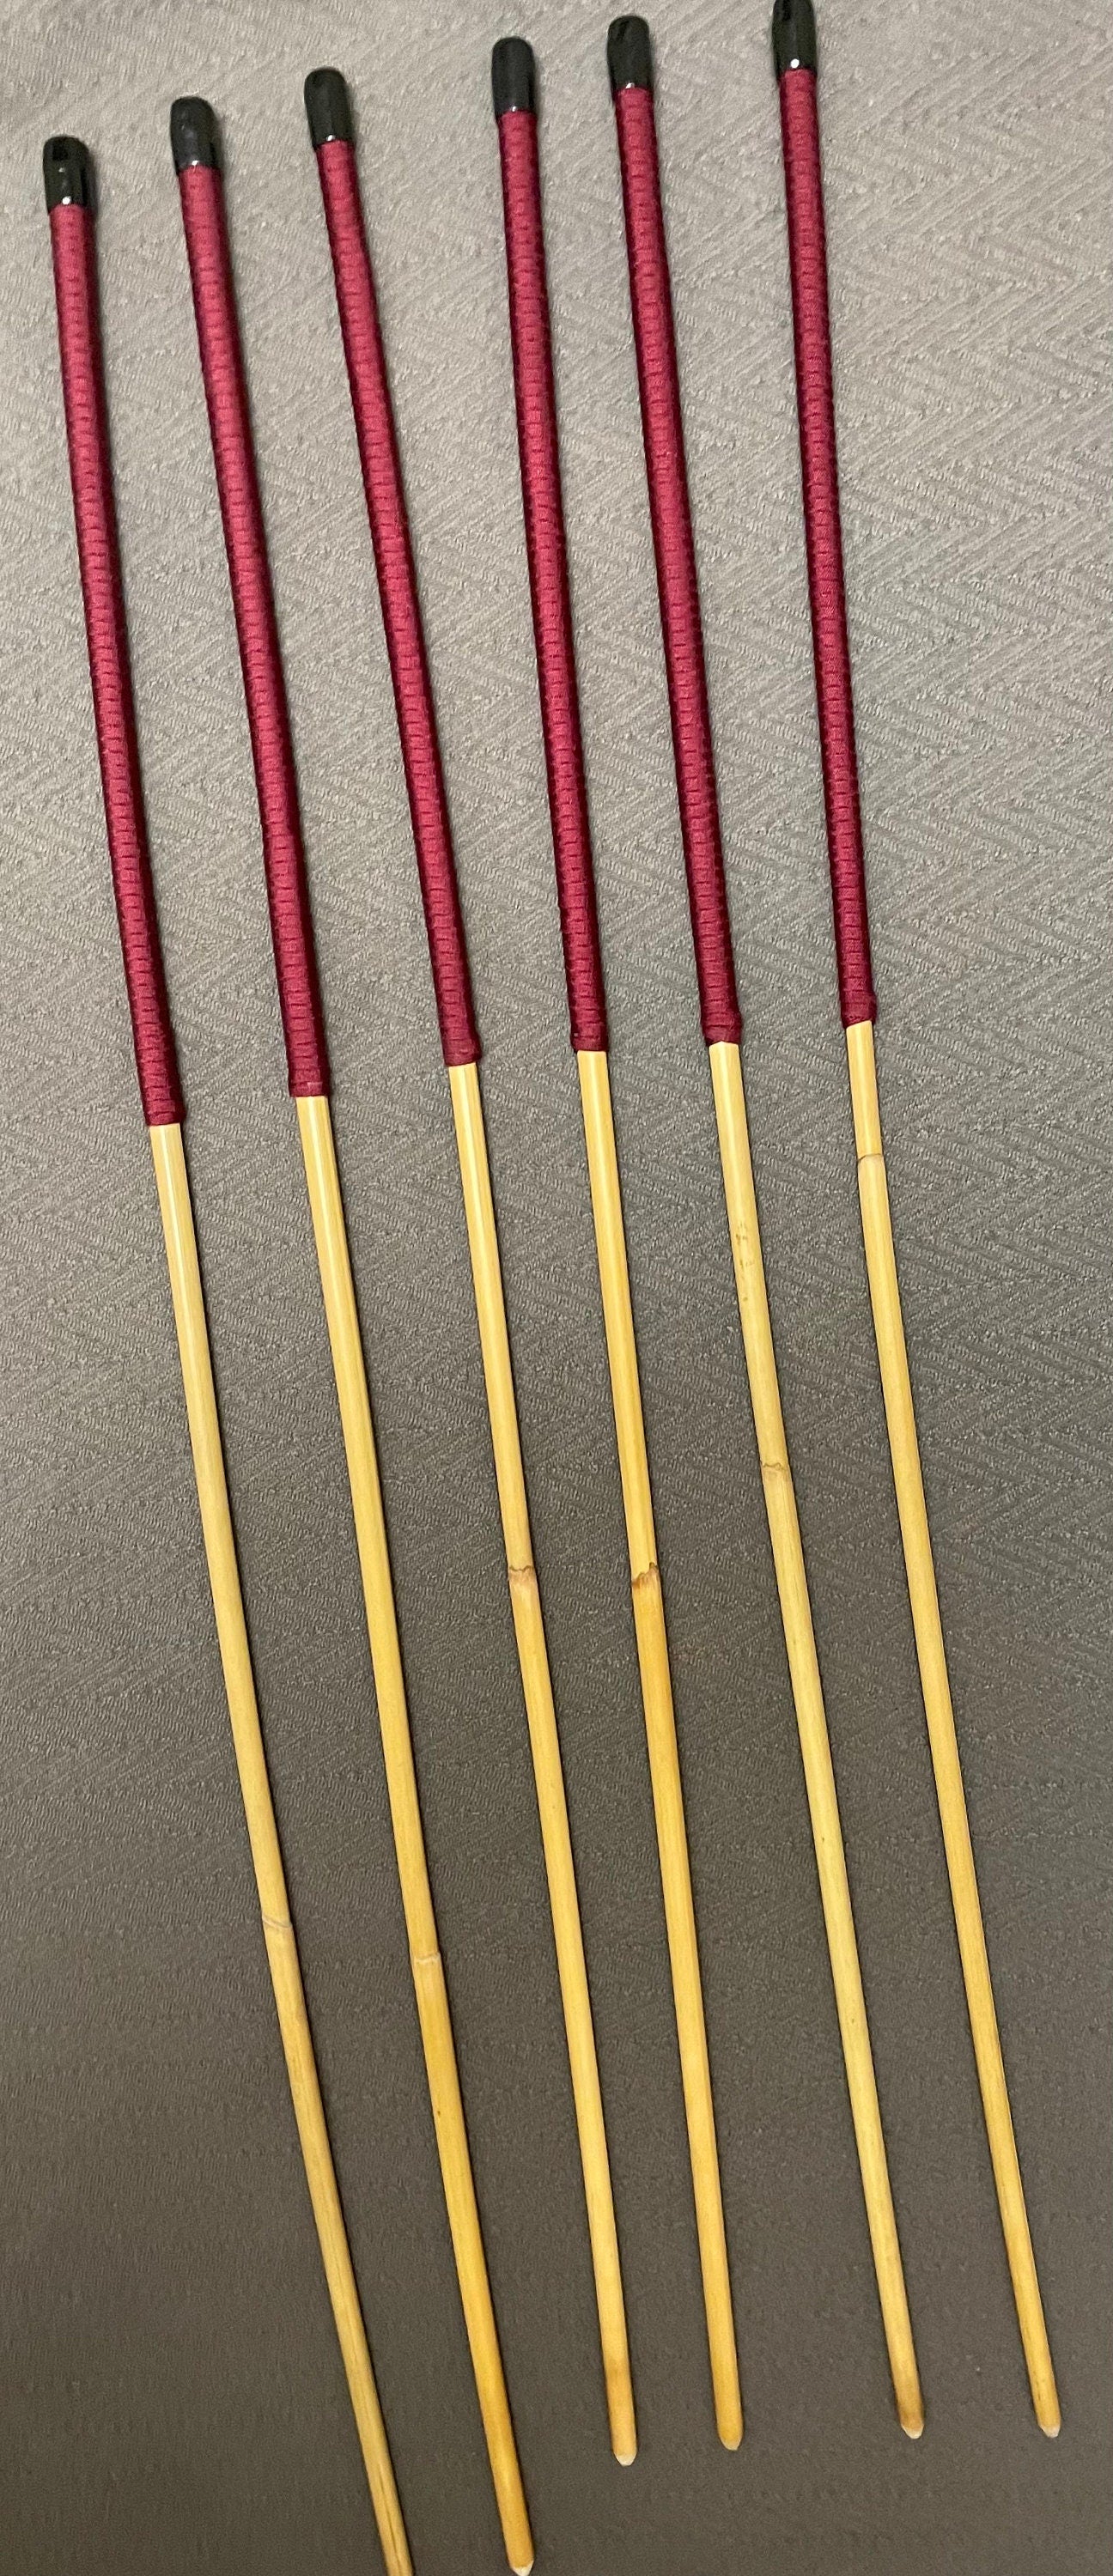 Thick and Thuddy Dragon Cane Set of 6 Rattan Canes  - 95 to 100 cms Length - Burgundy Paracord Handlles